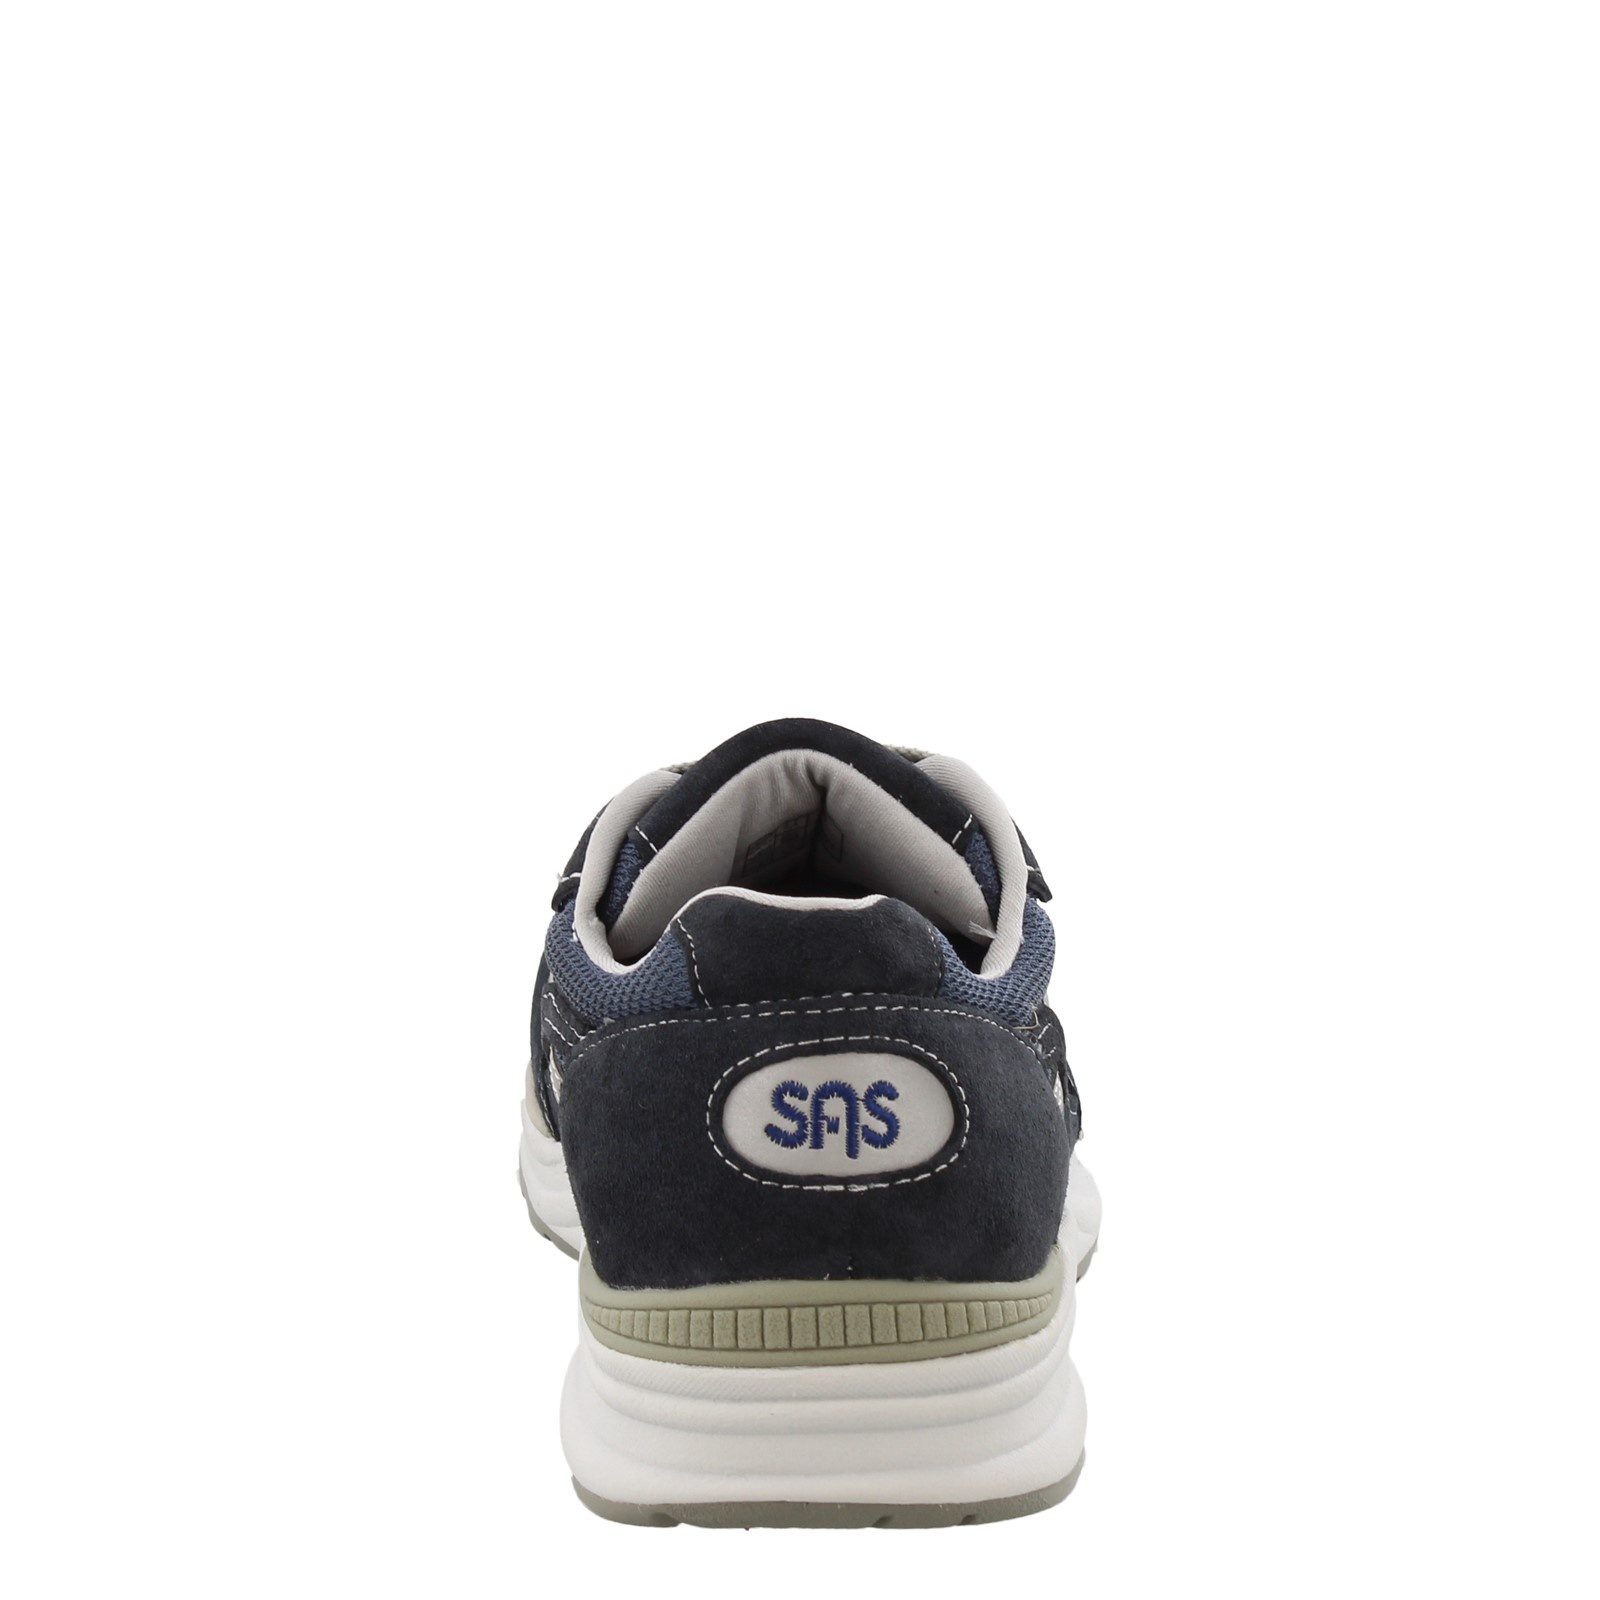 Something Navy, Ba&sh Shoe Collection: Photos, Prices, Details – WWD